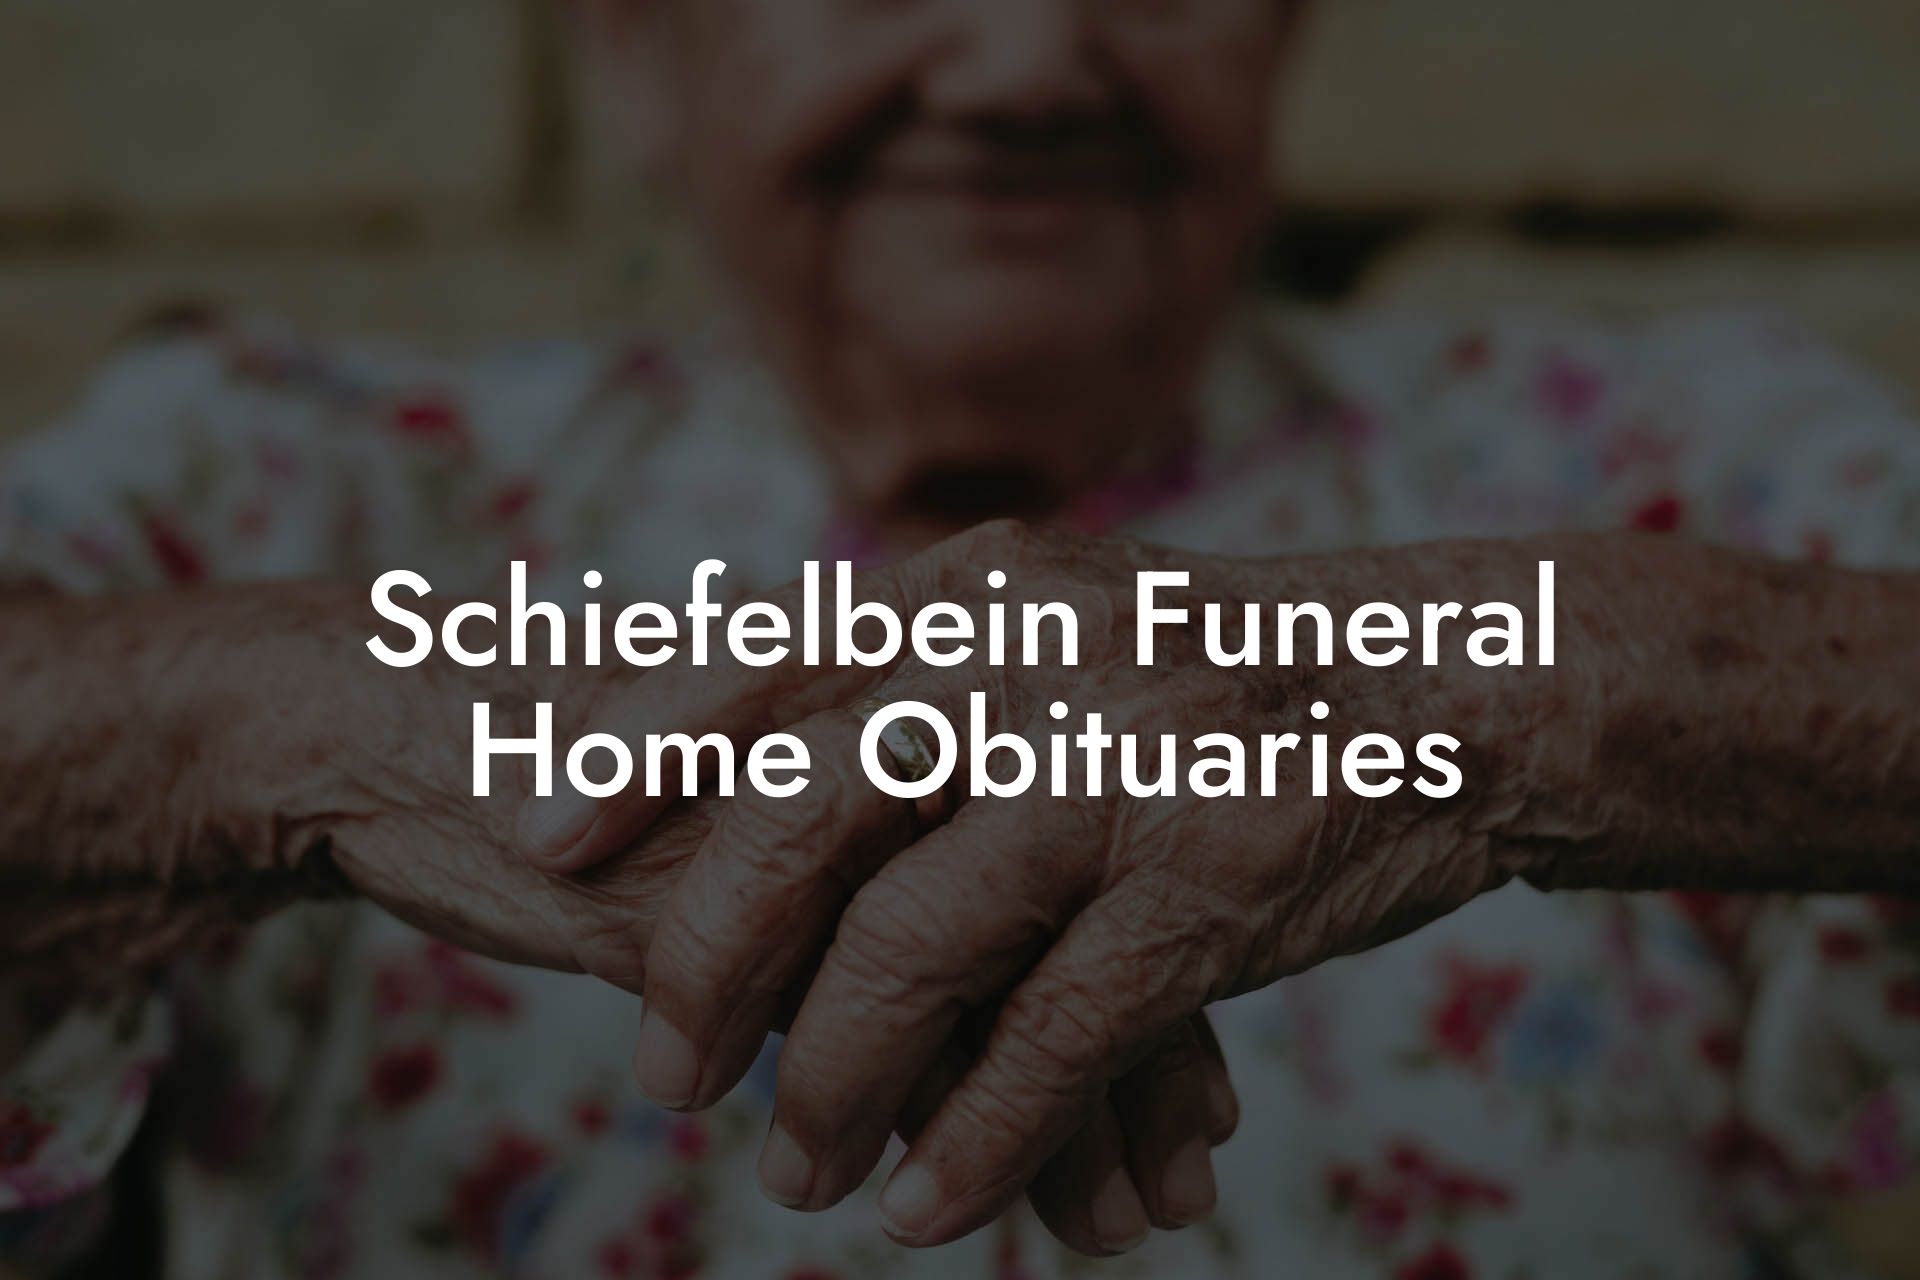 Schiefelbein Funeral Home Obituaries